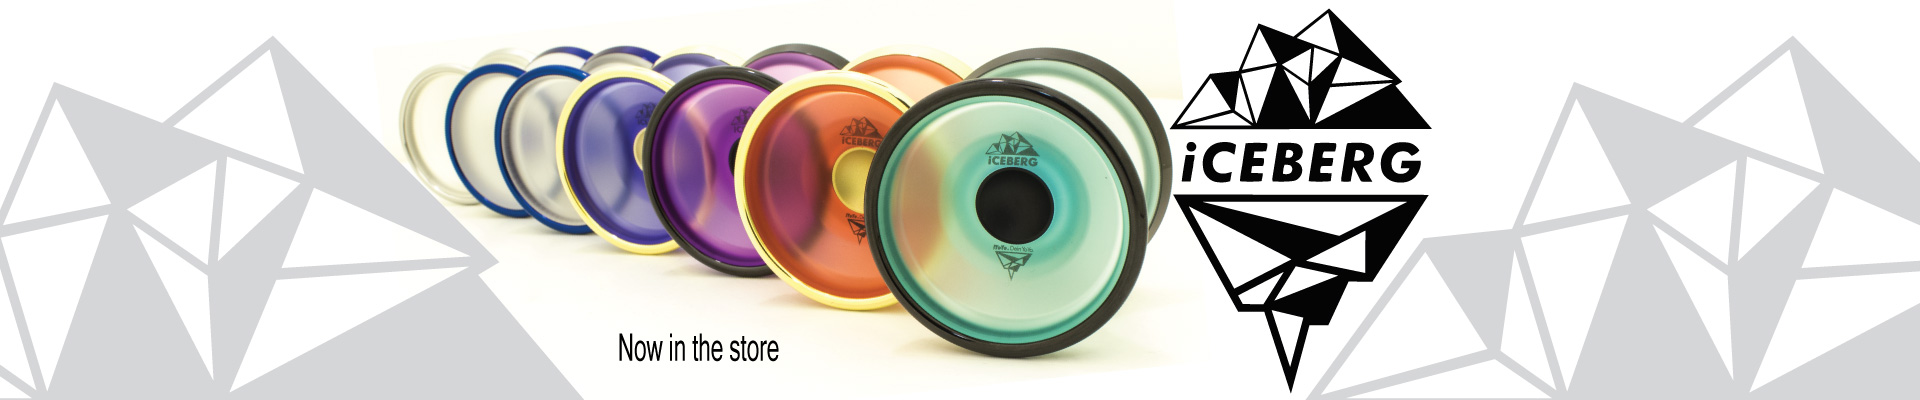 The iYoYo iCEBERG is now in the store